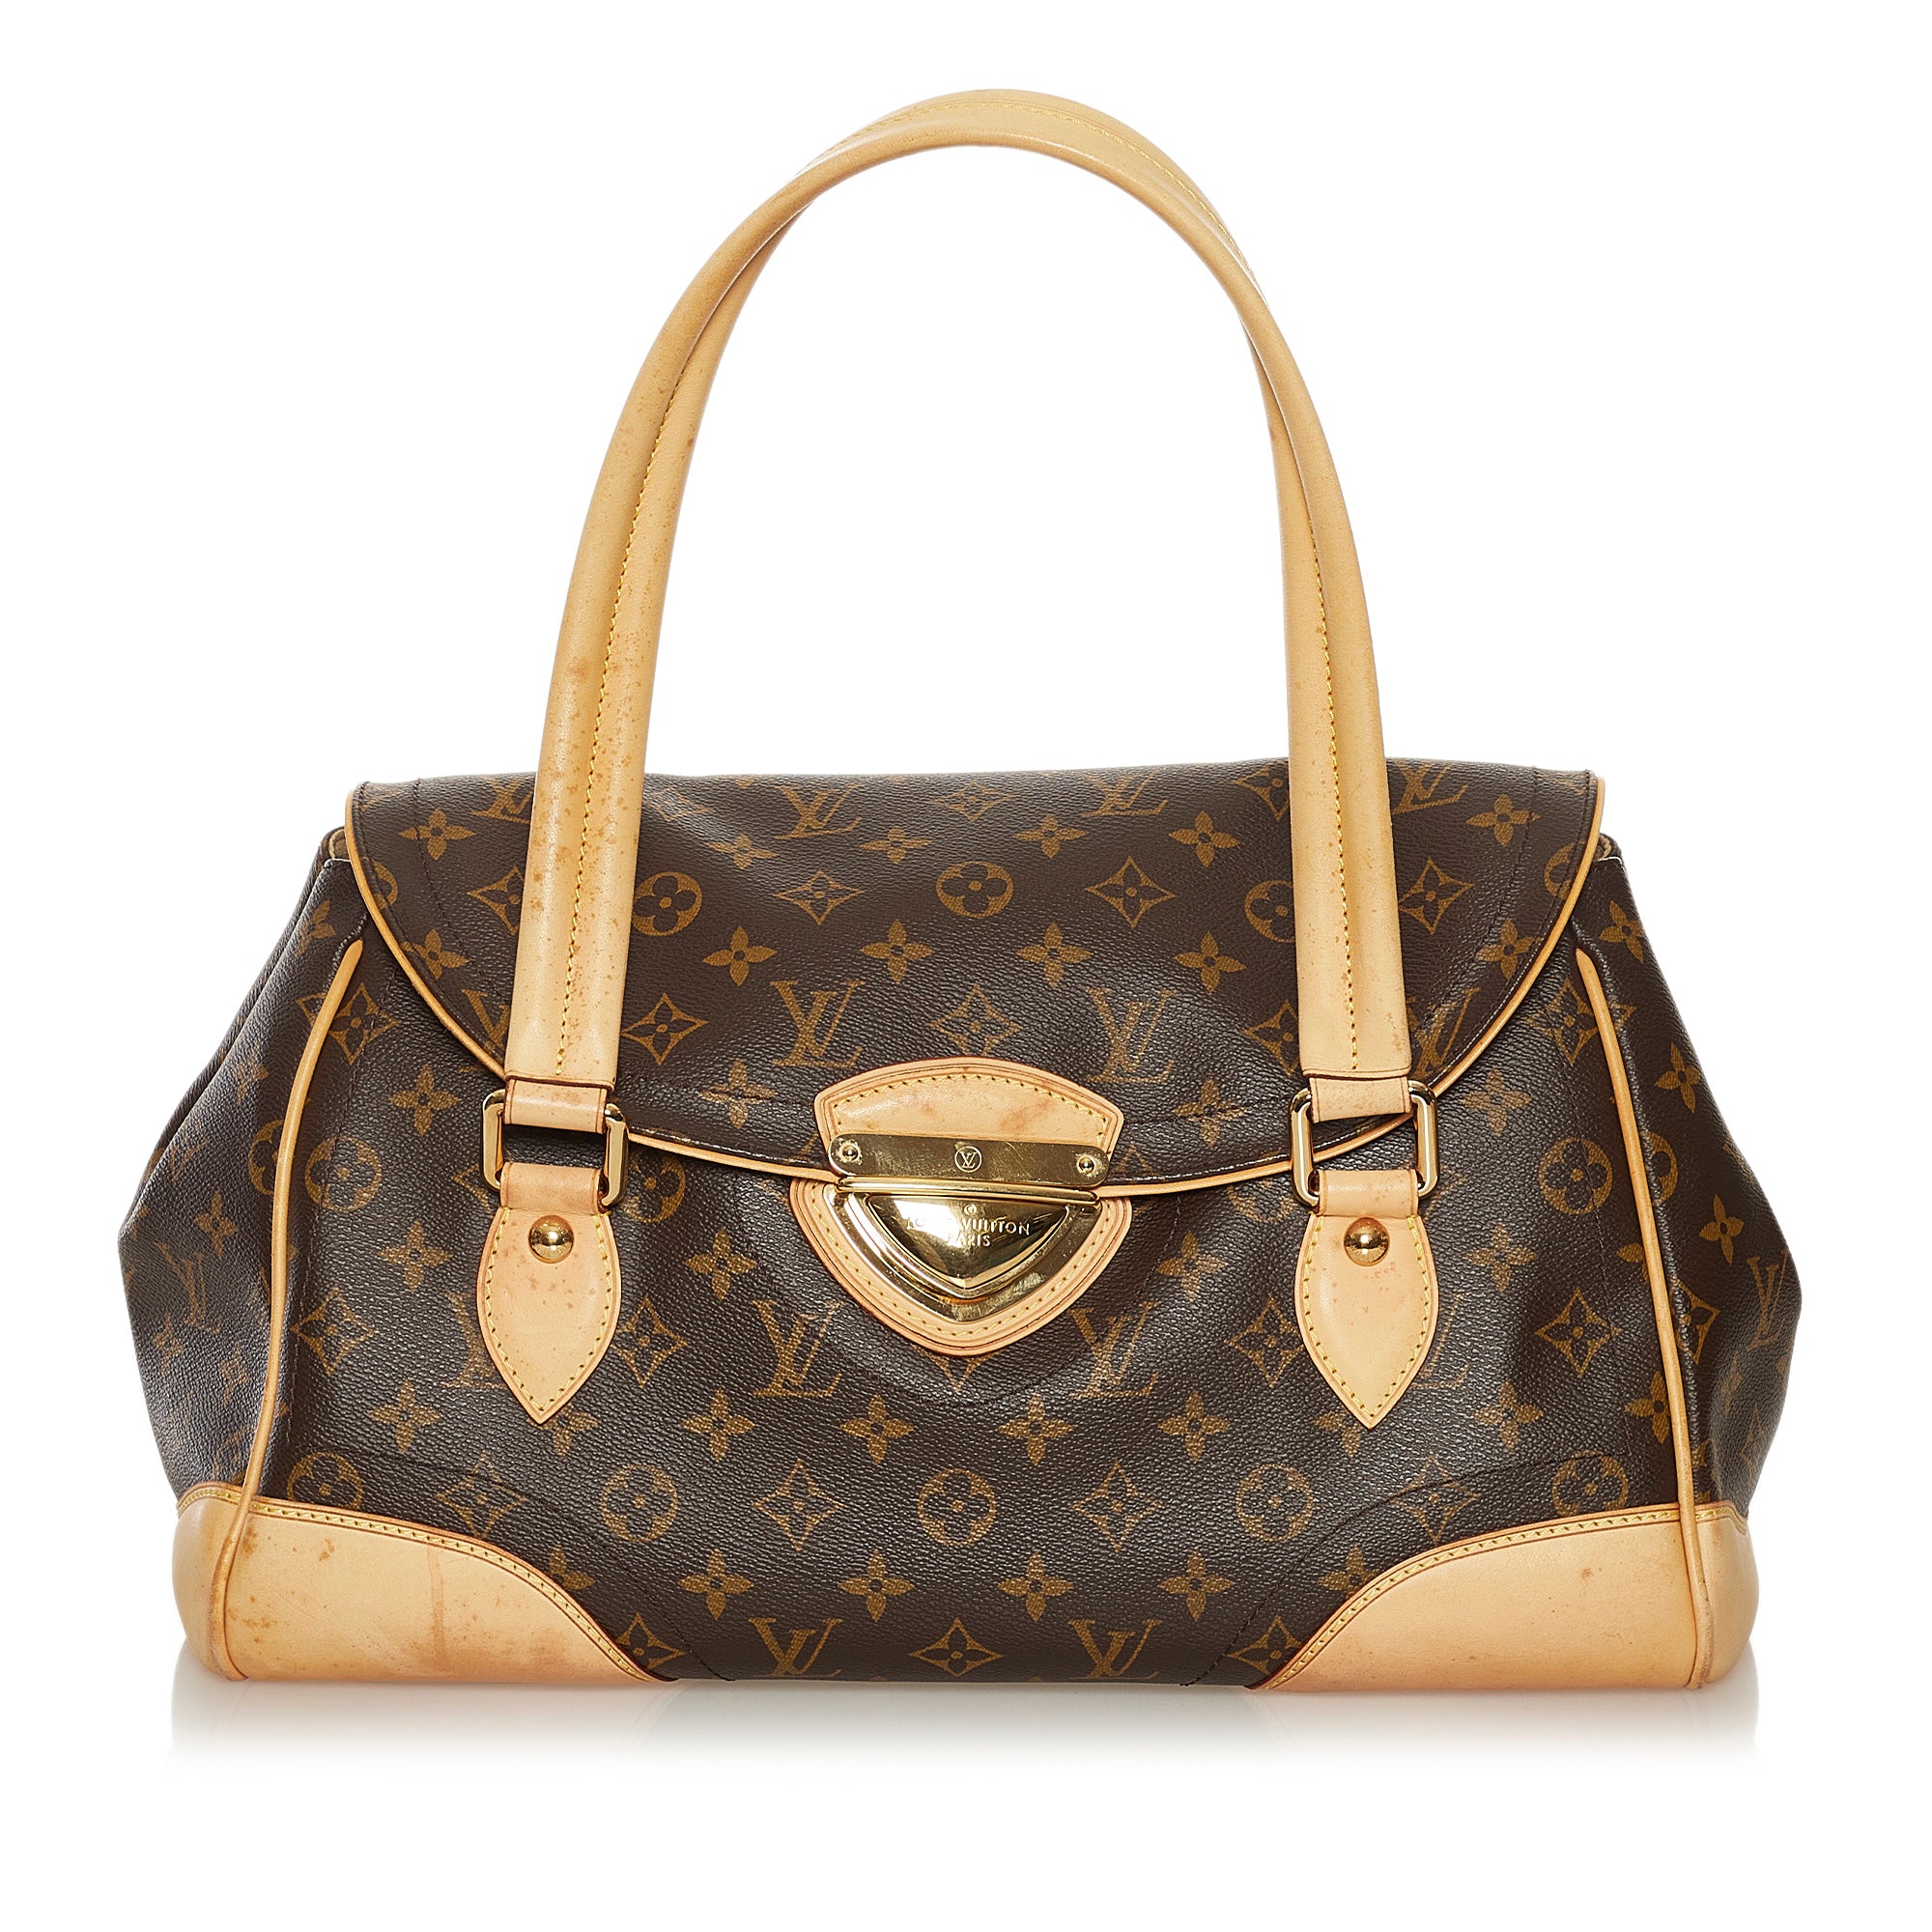 louis vuitton all in bandouliere gm